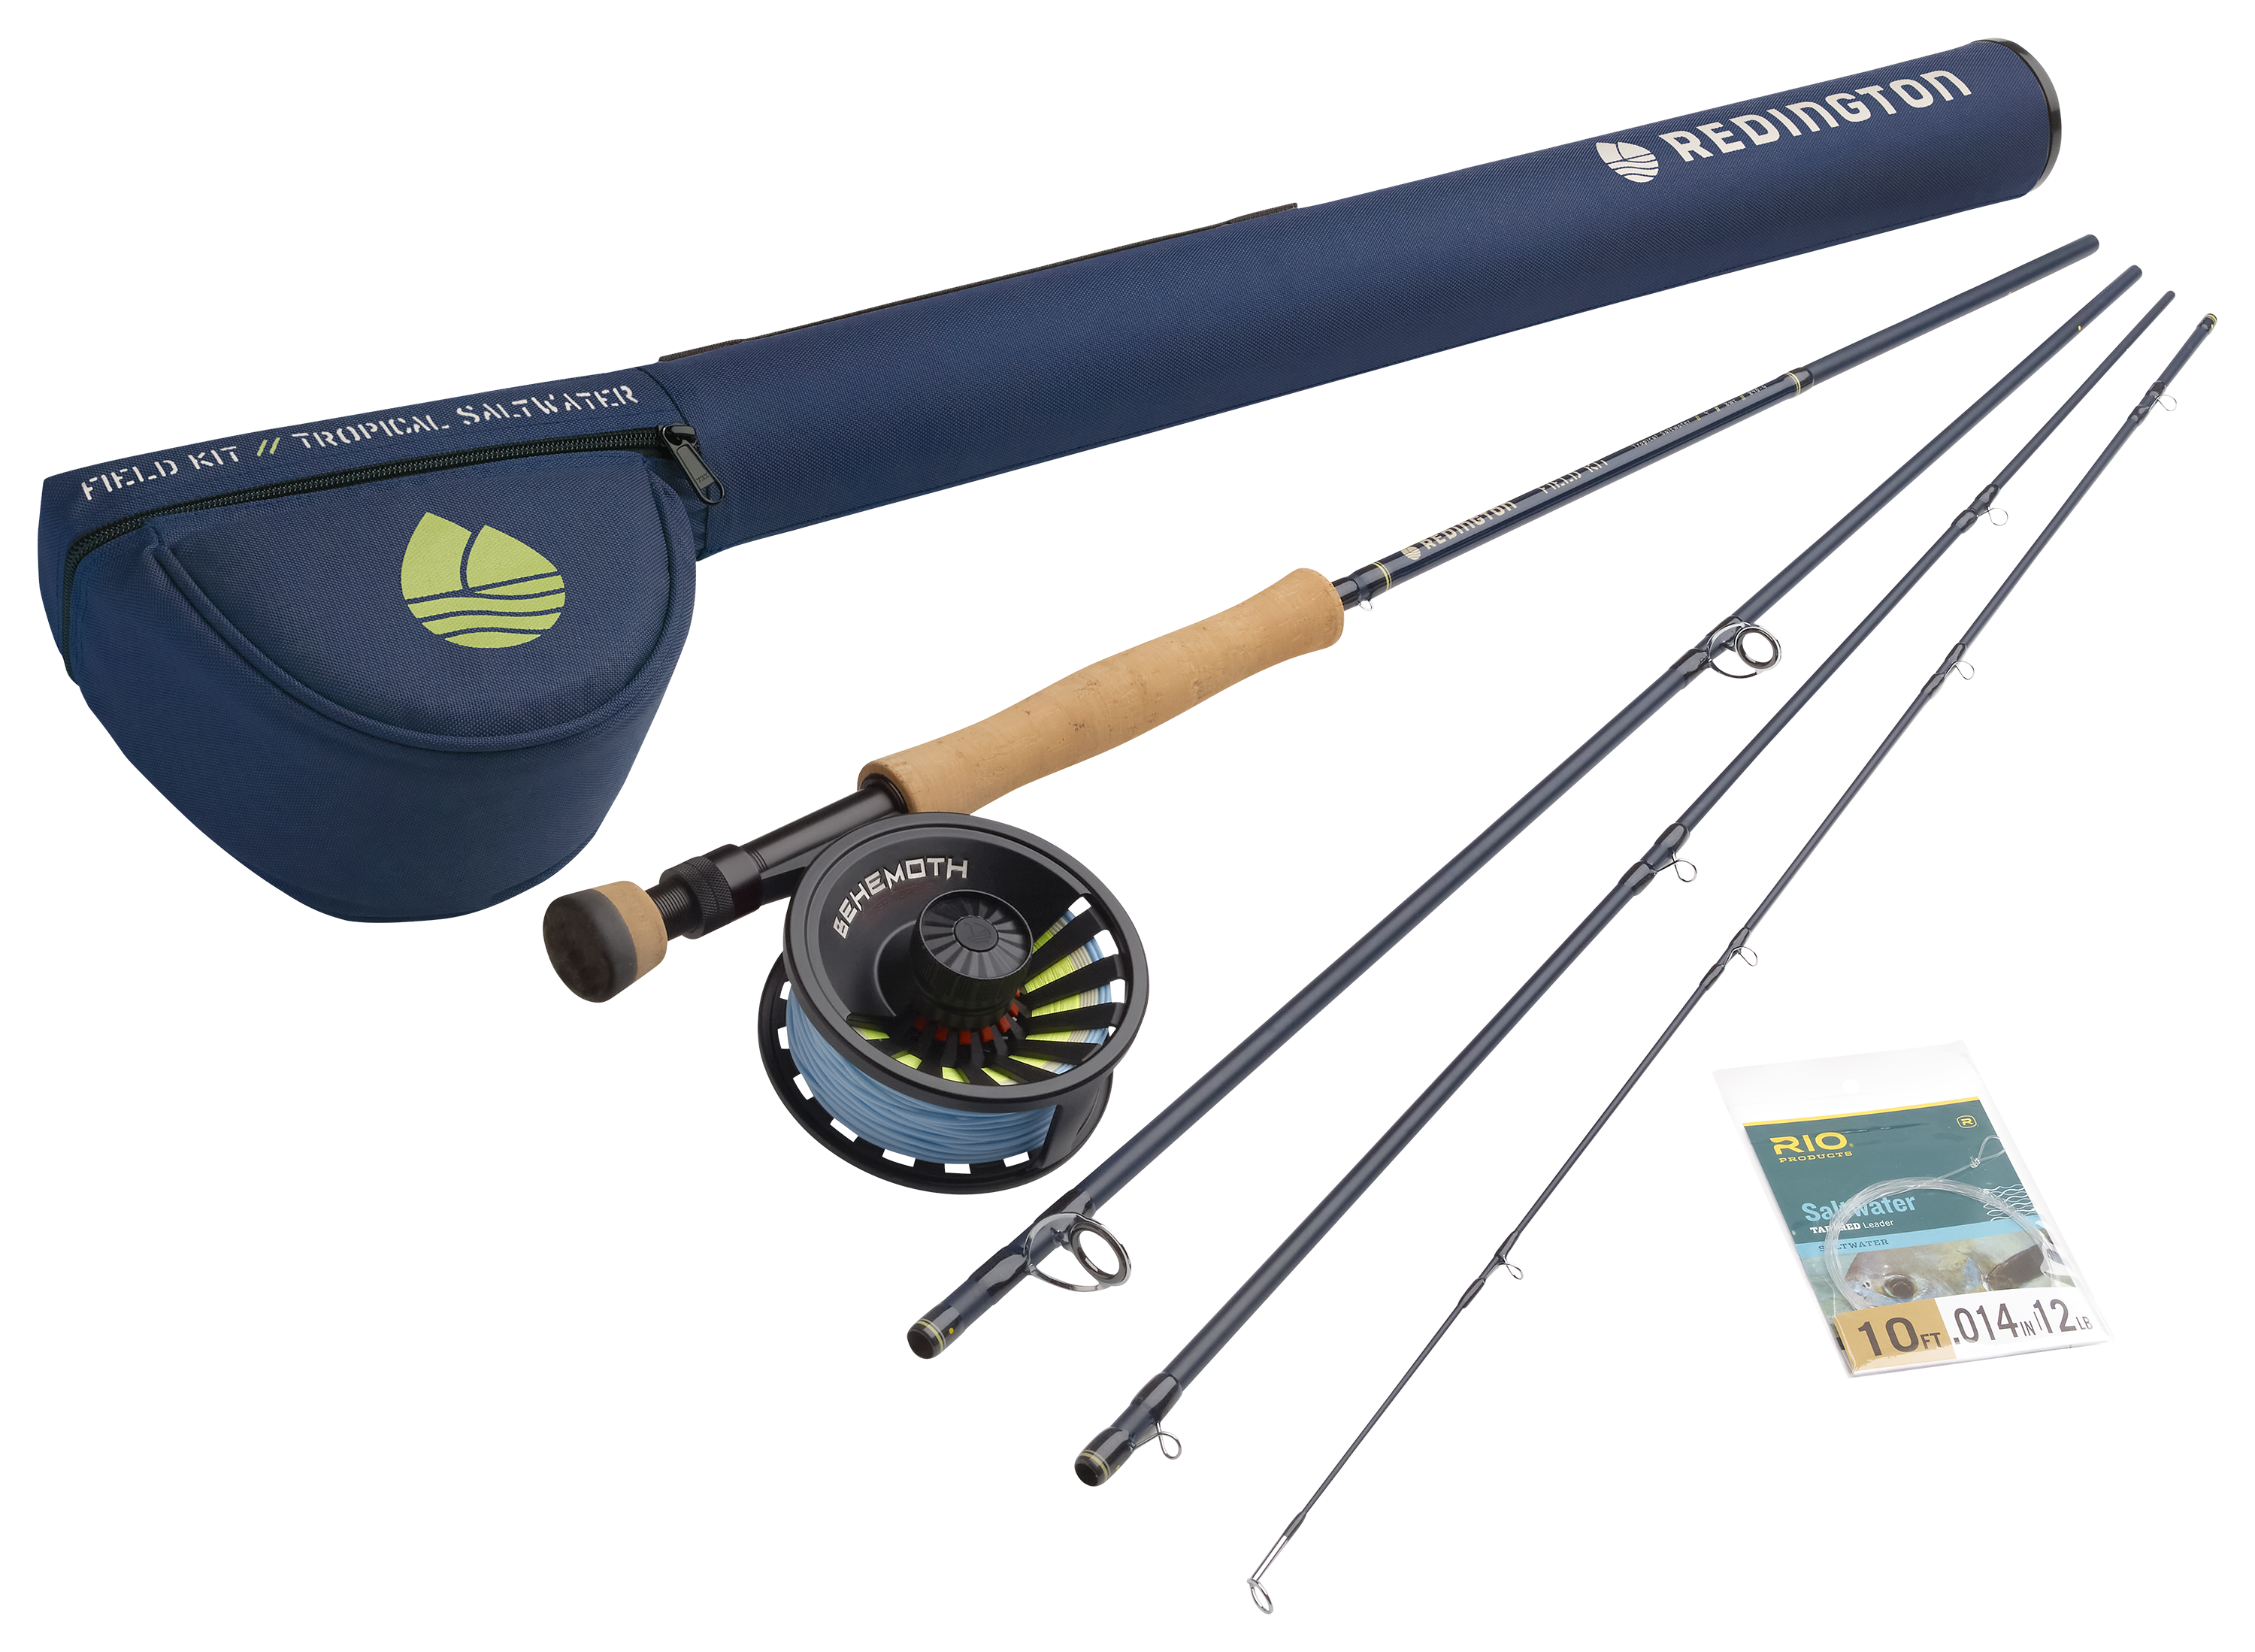 Redington Tropical Saltwater Field Kit Outfit